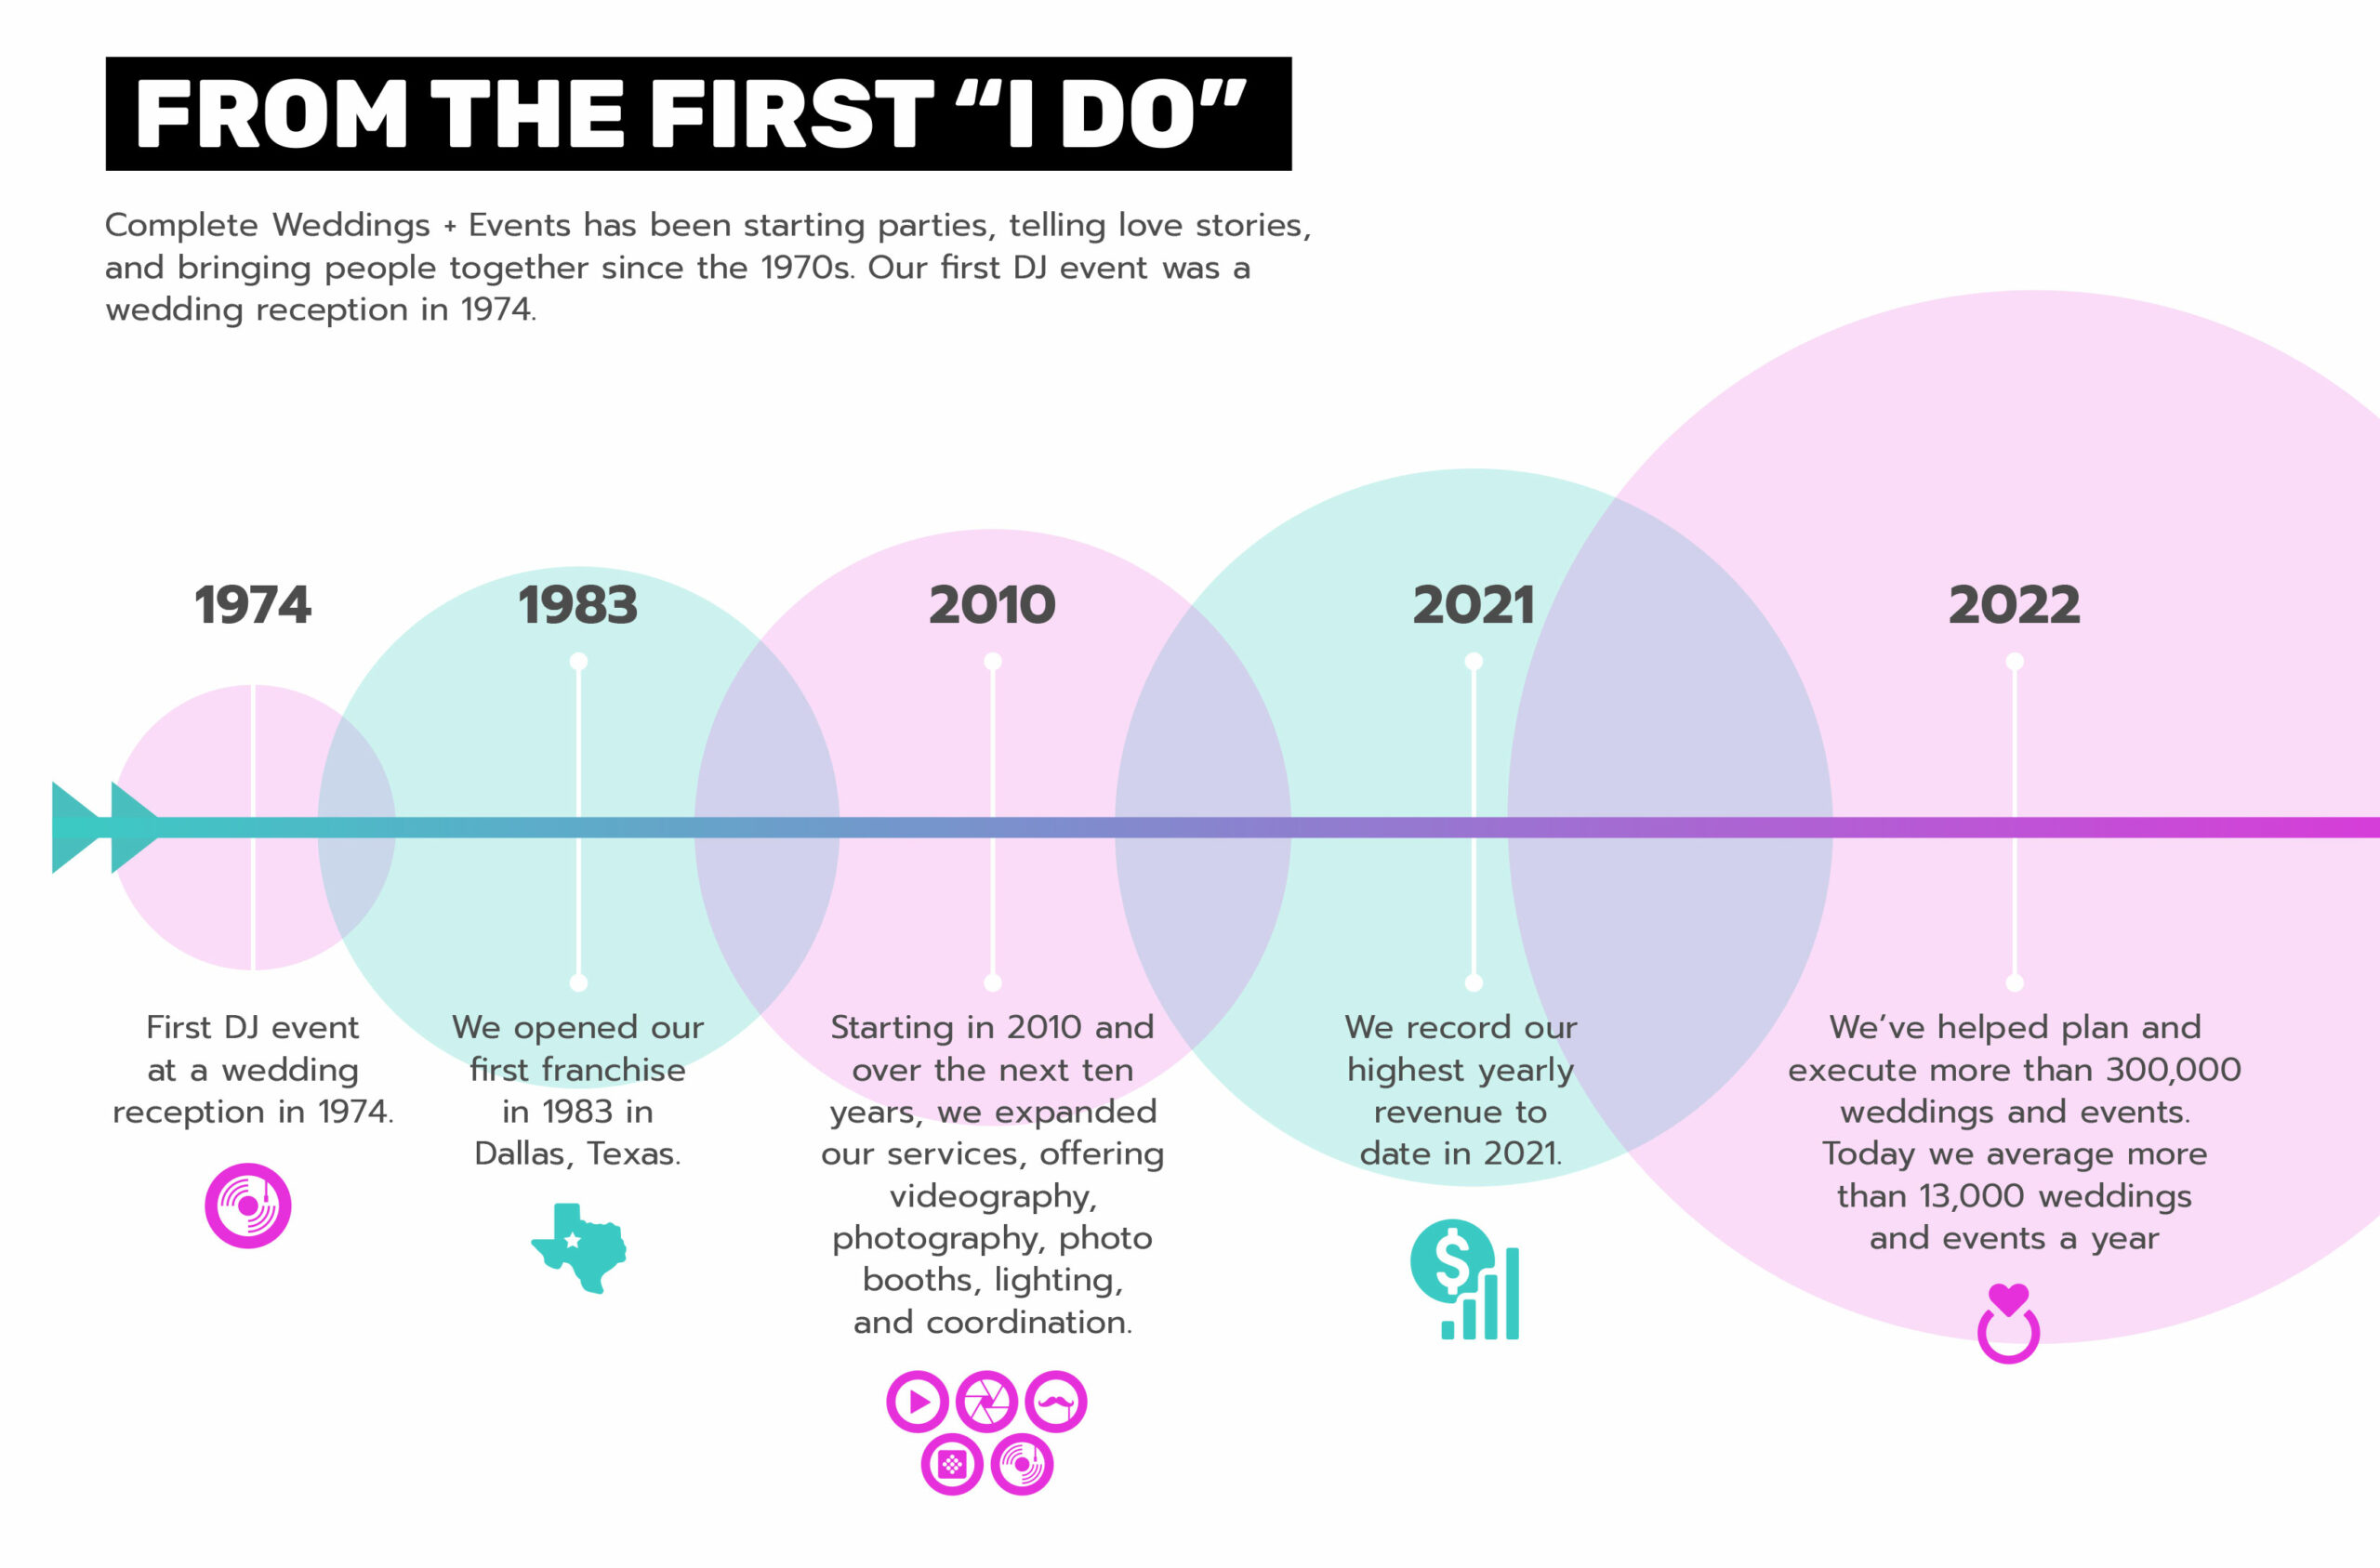 Timeline of a successful wedding business